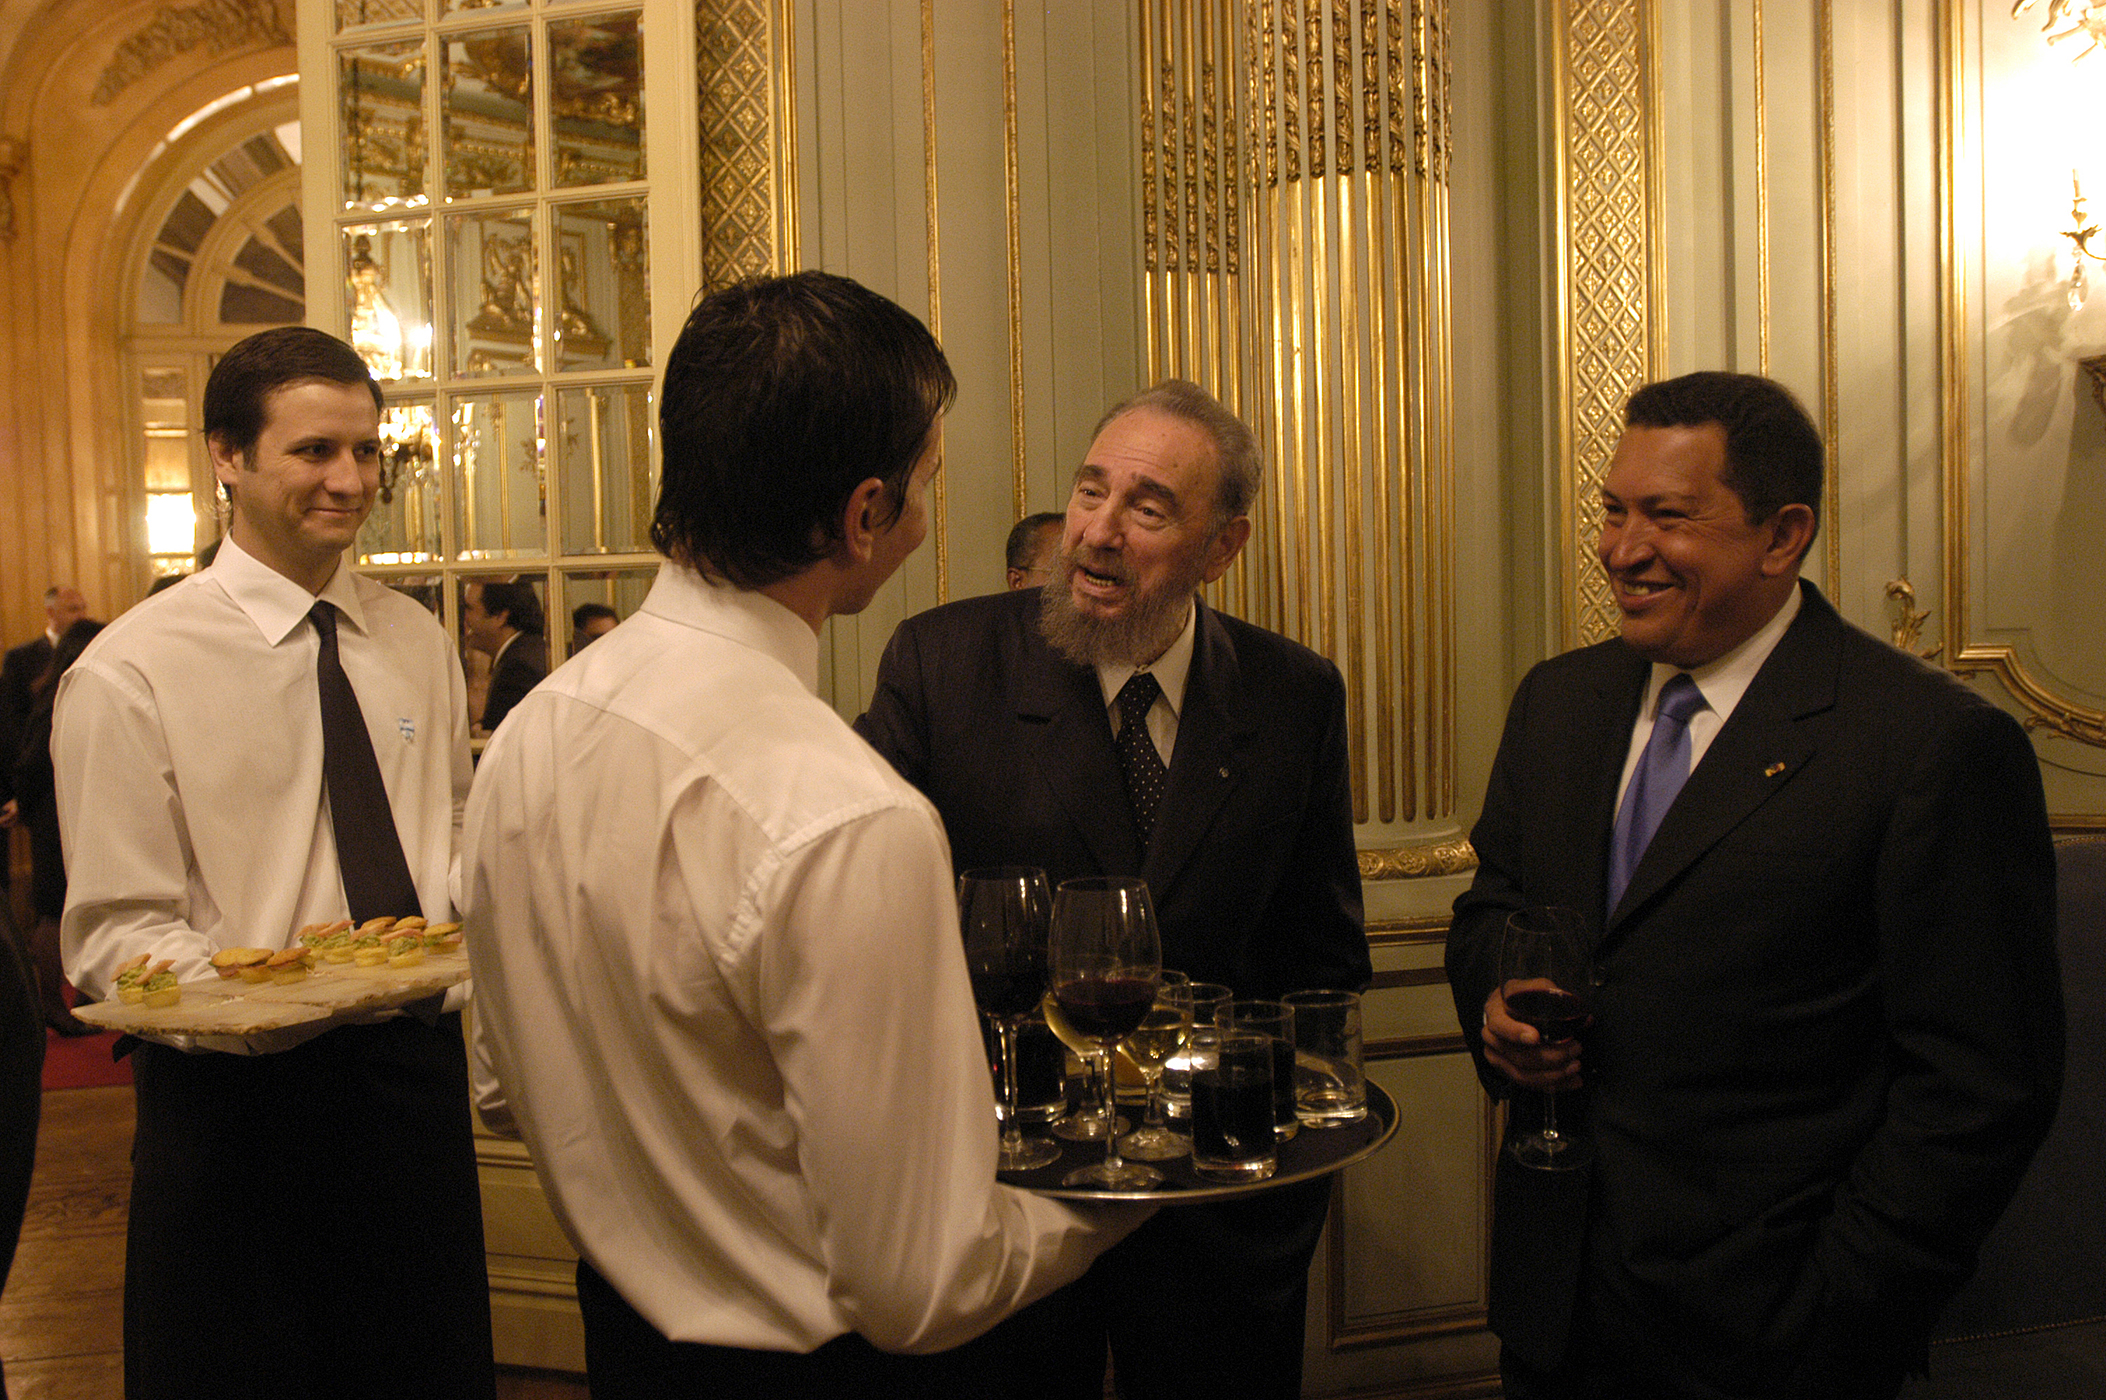  Fidel Castro and Hugo Chavez at a cocktail in Buenos Aires, 2003. 